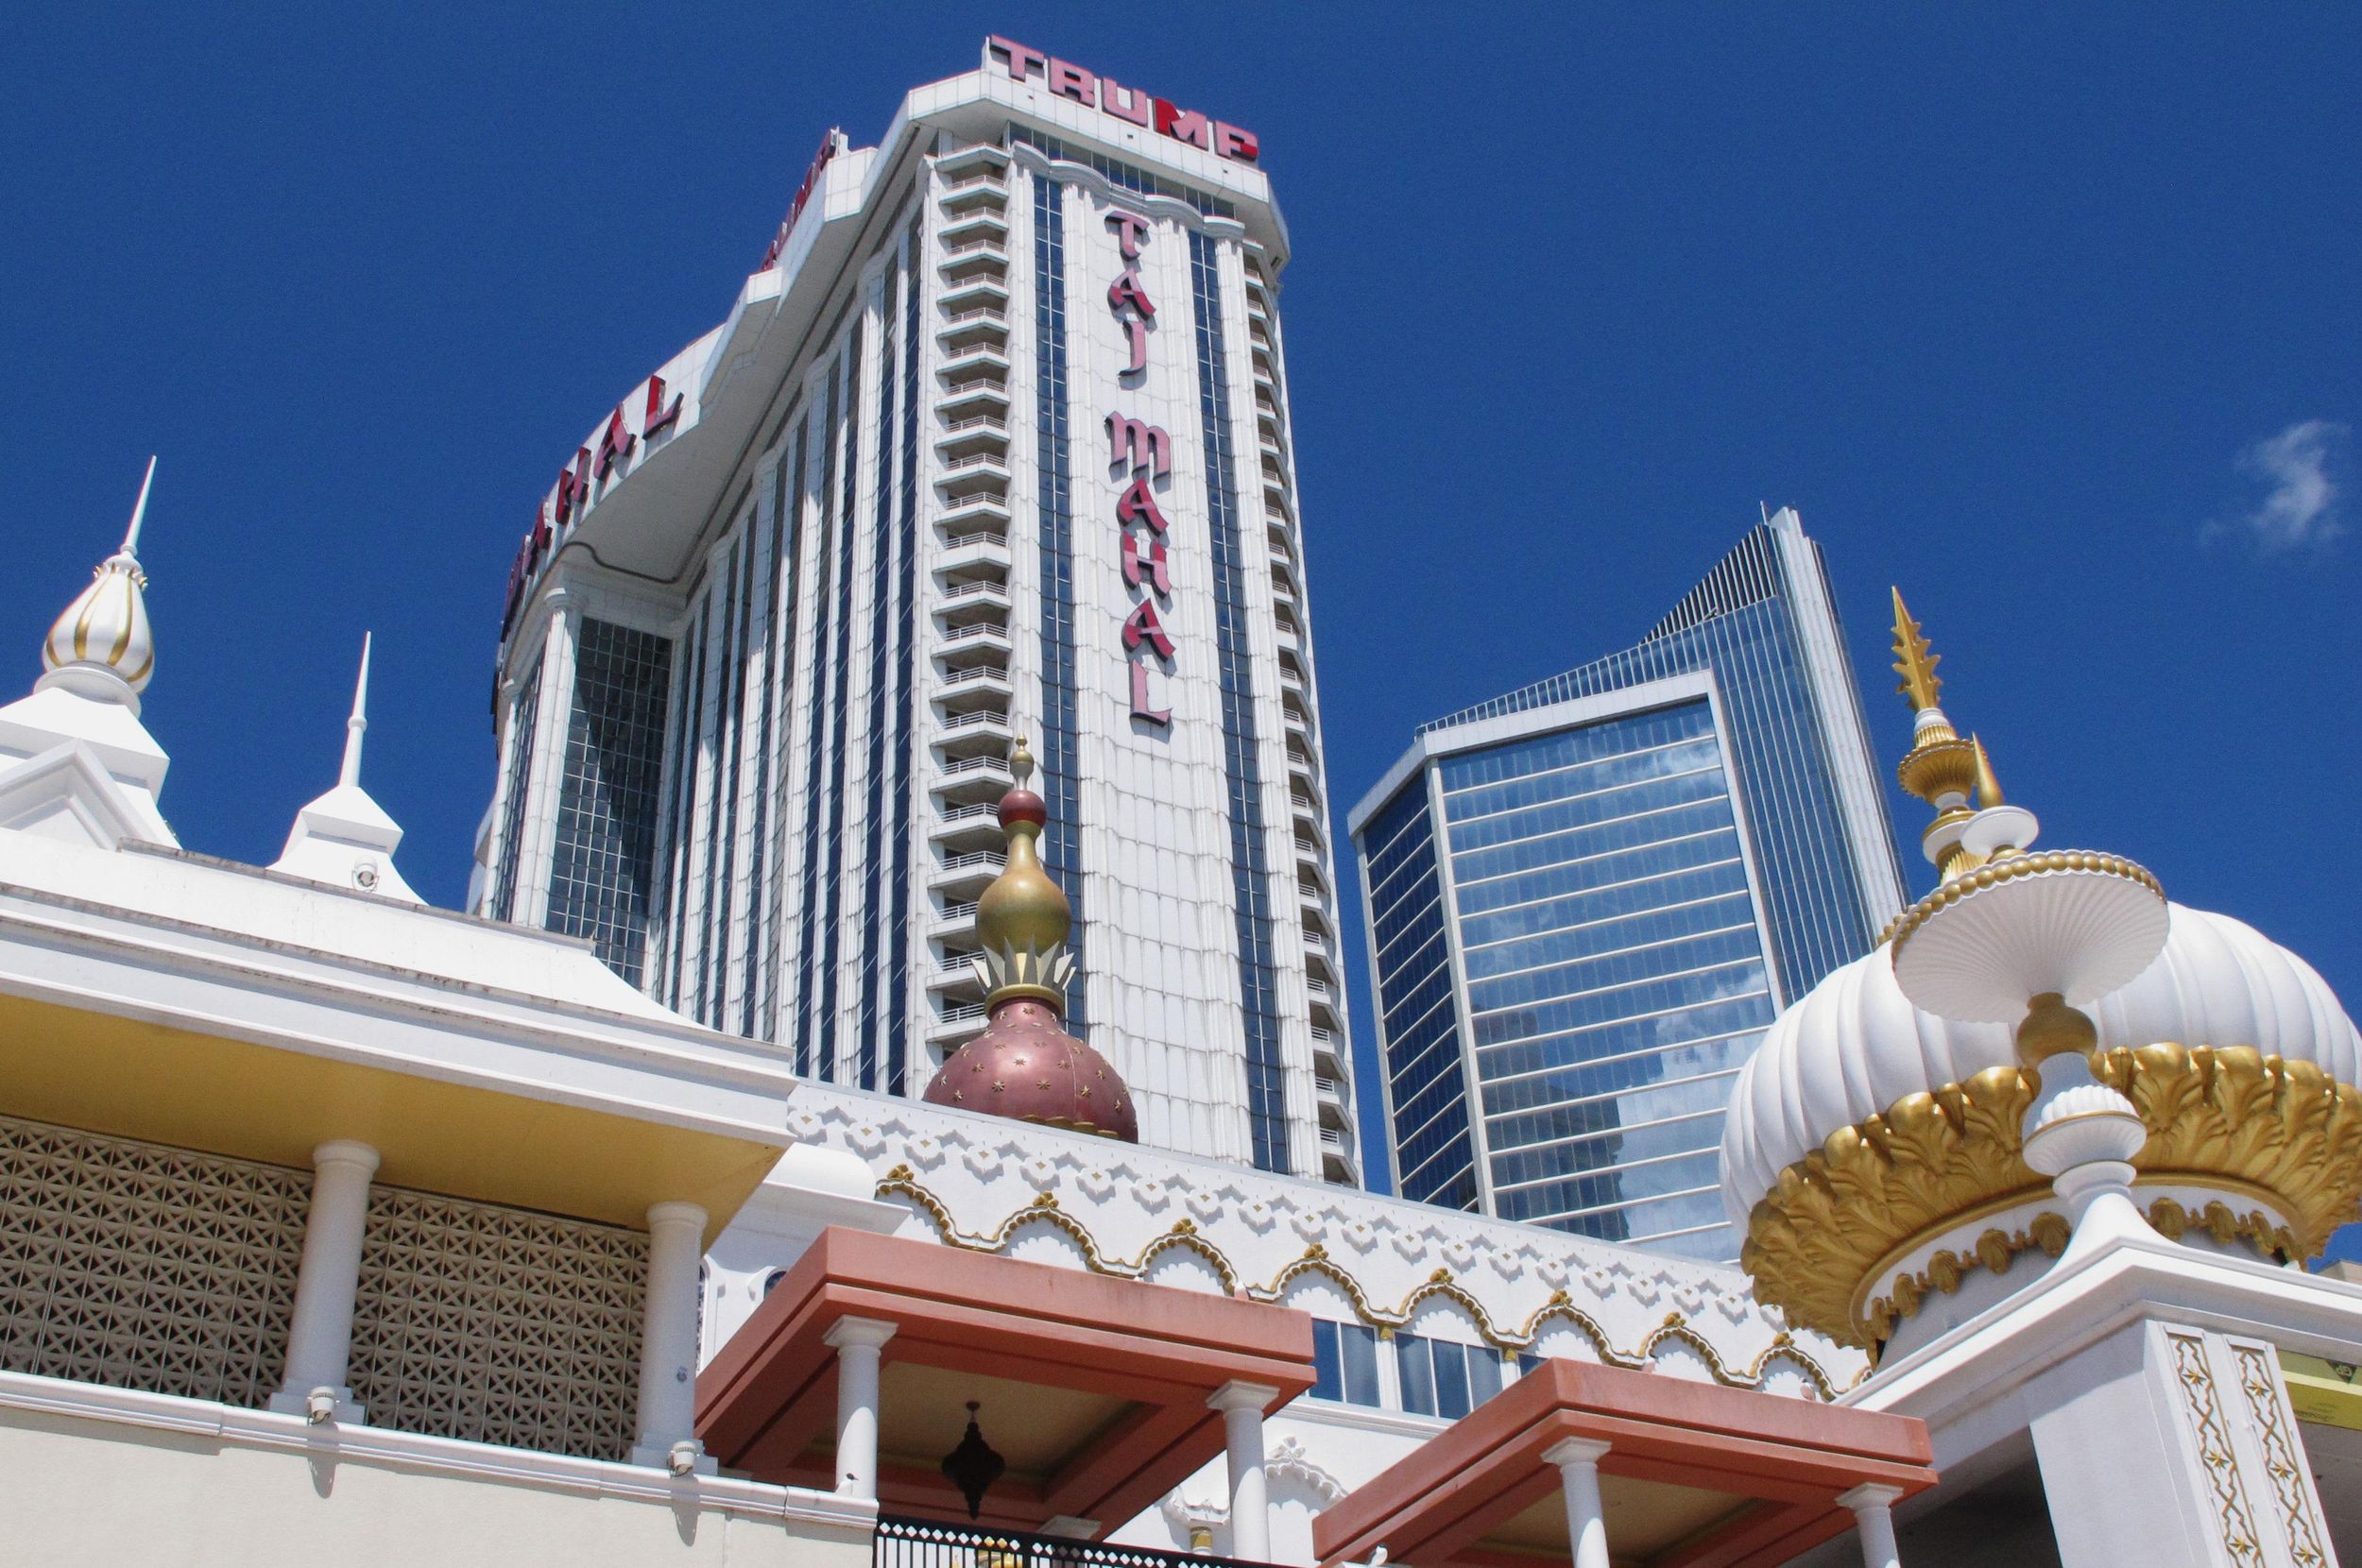 are drinks free while gambling in atlantic city